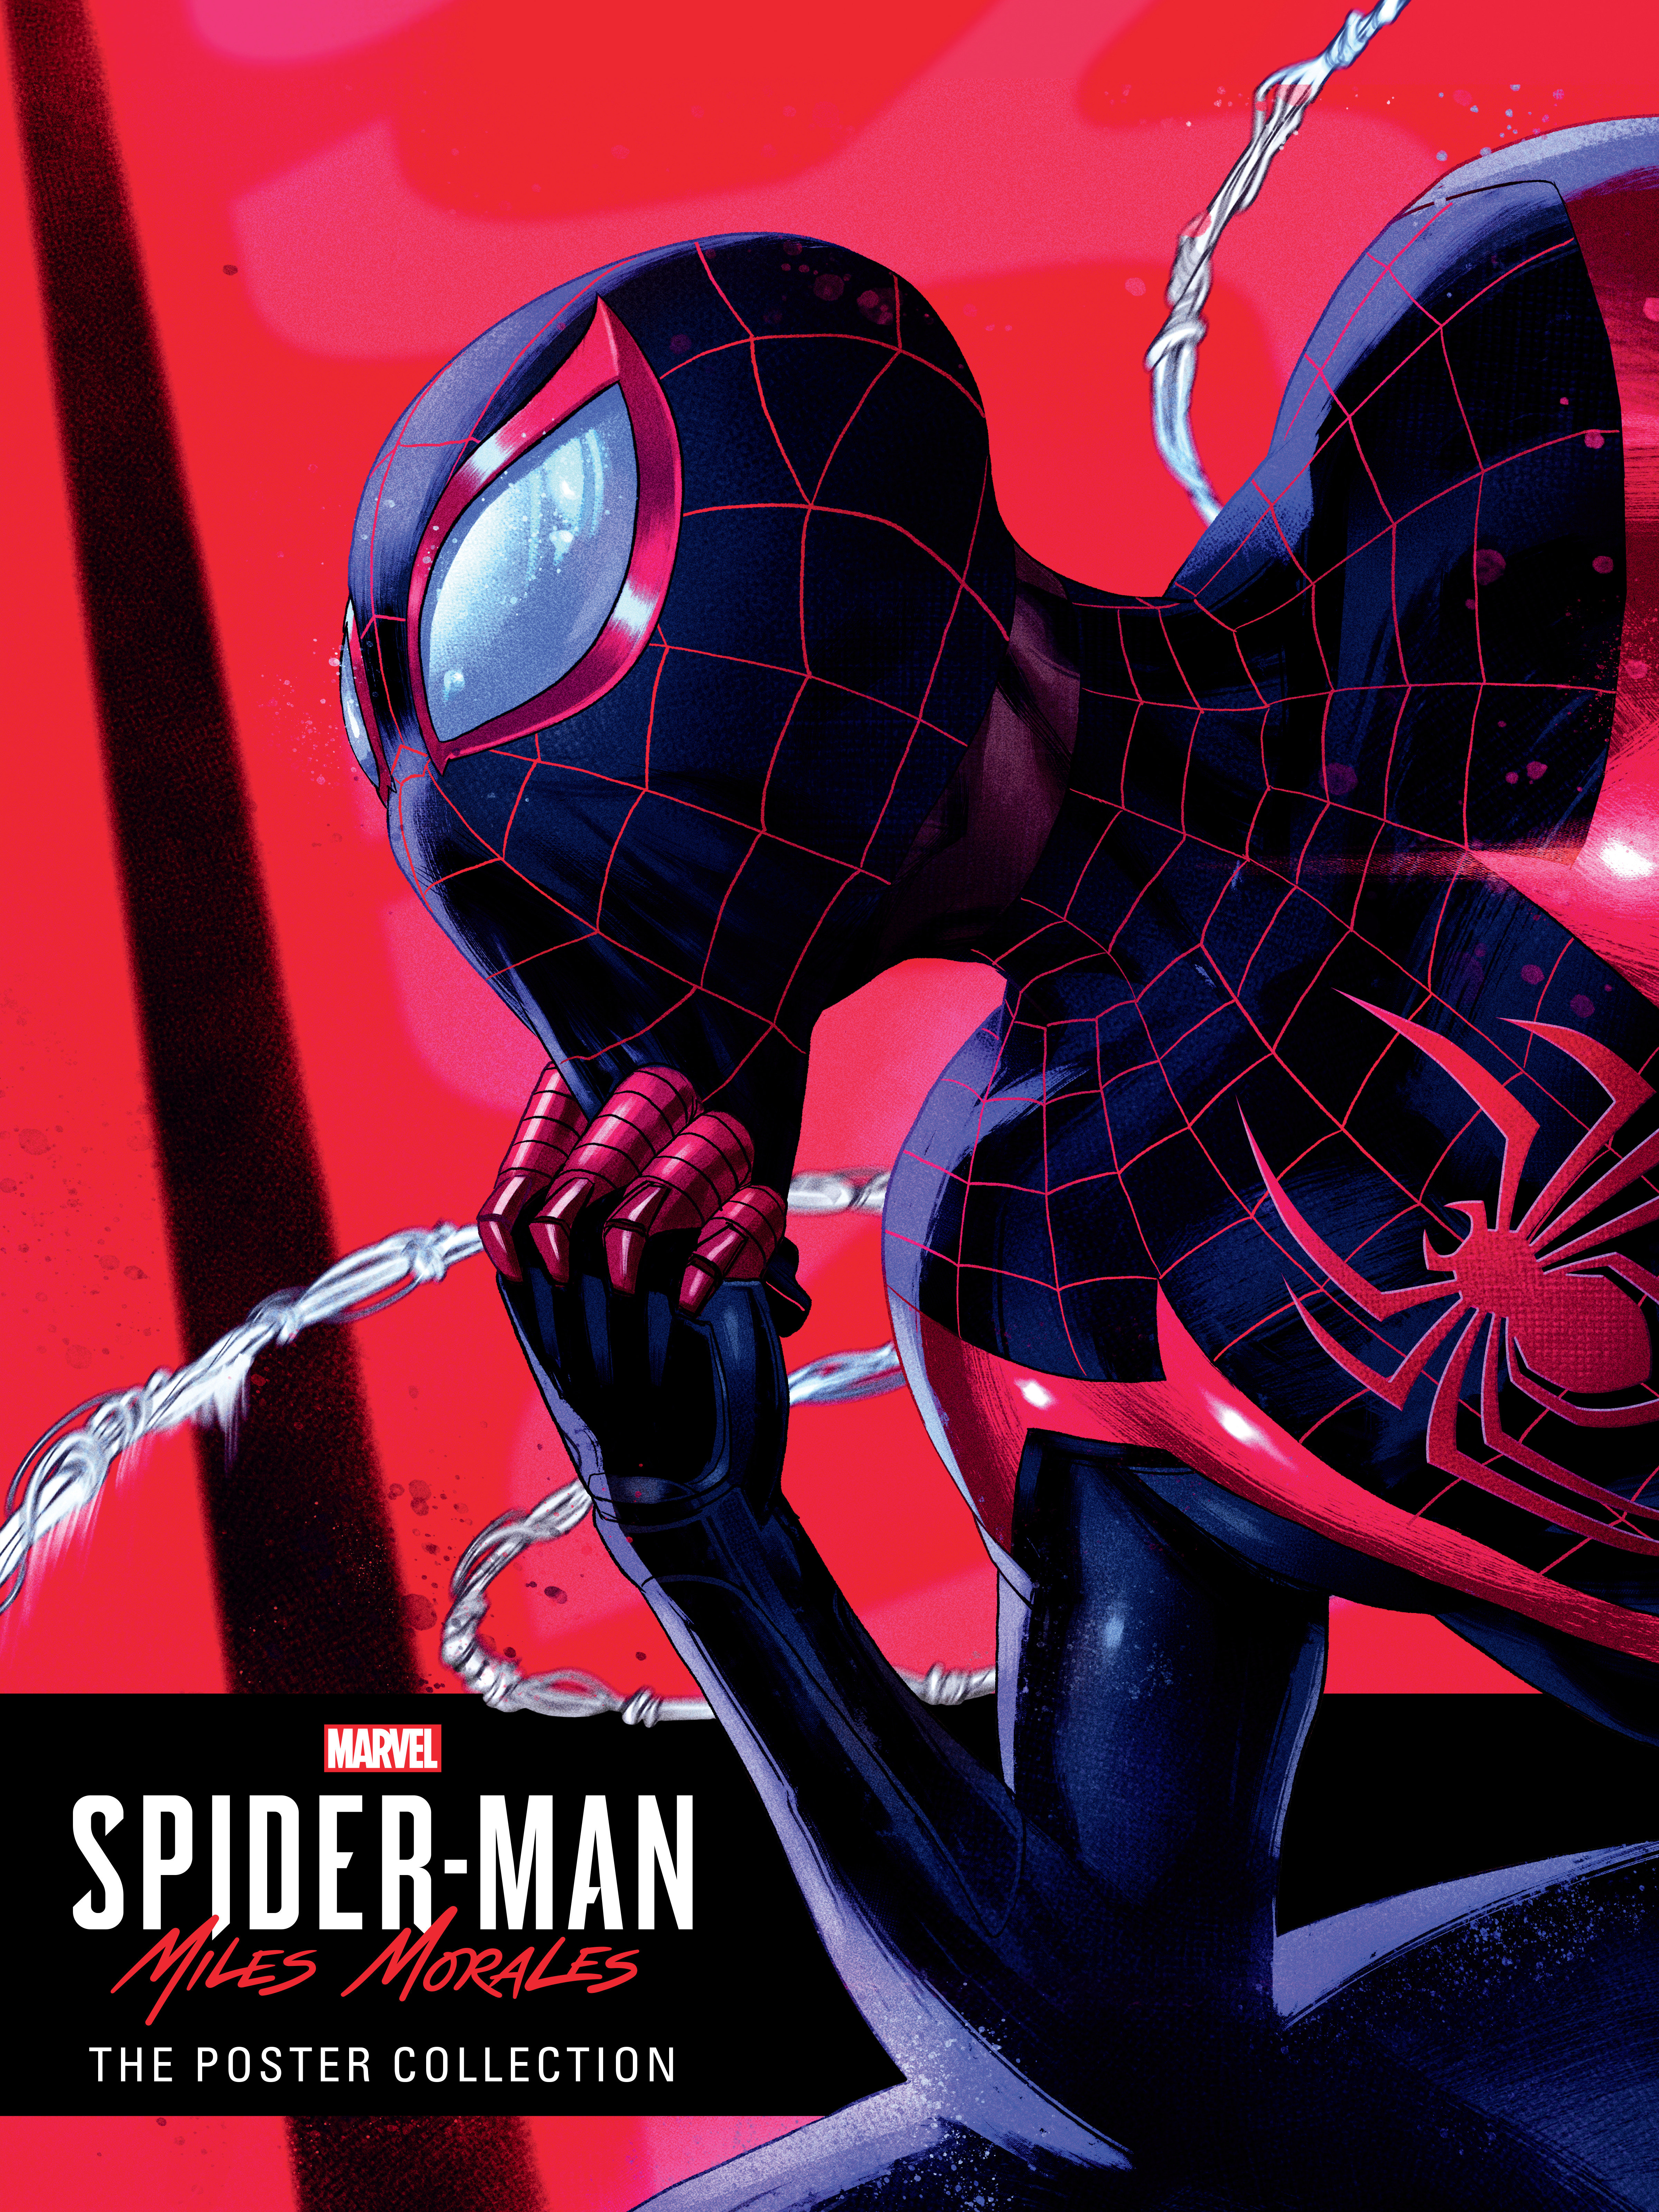 Marvels Spider-Man Miles Morales Poster Collected Soft Cover